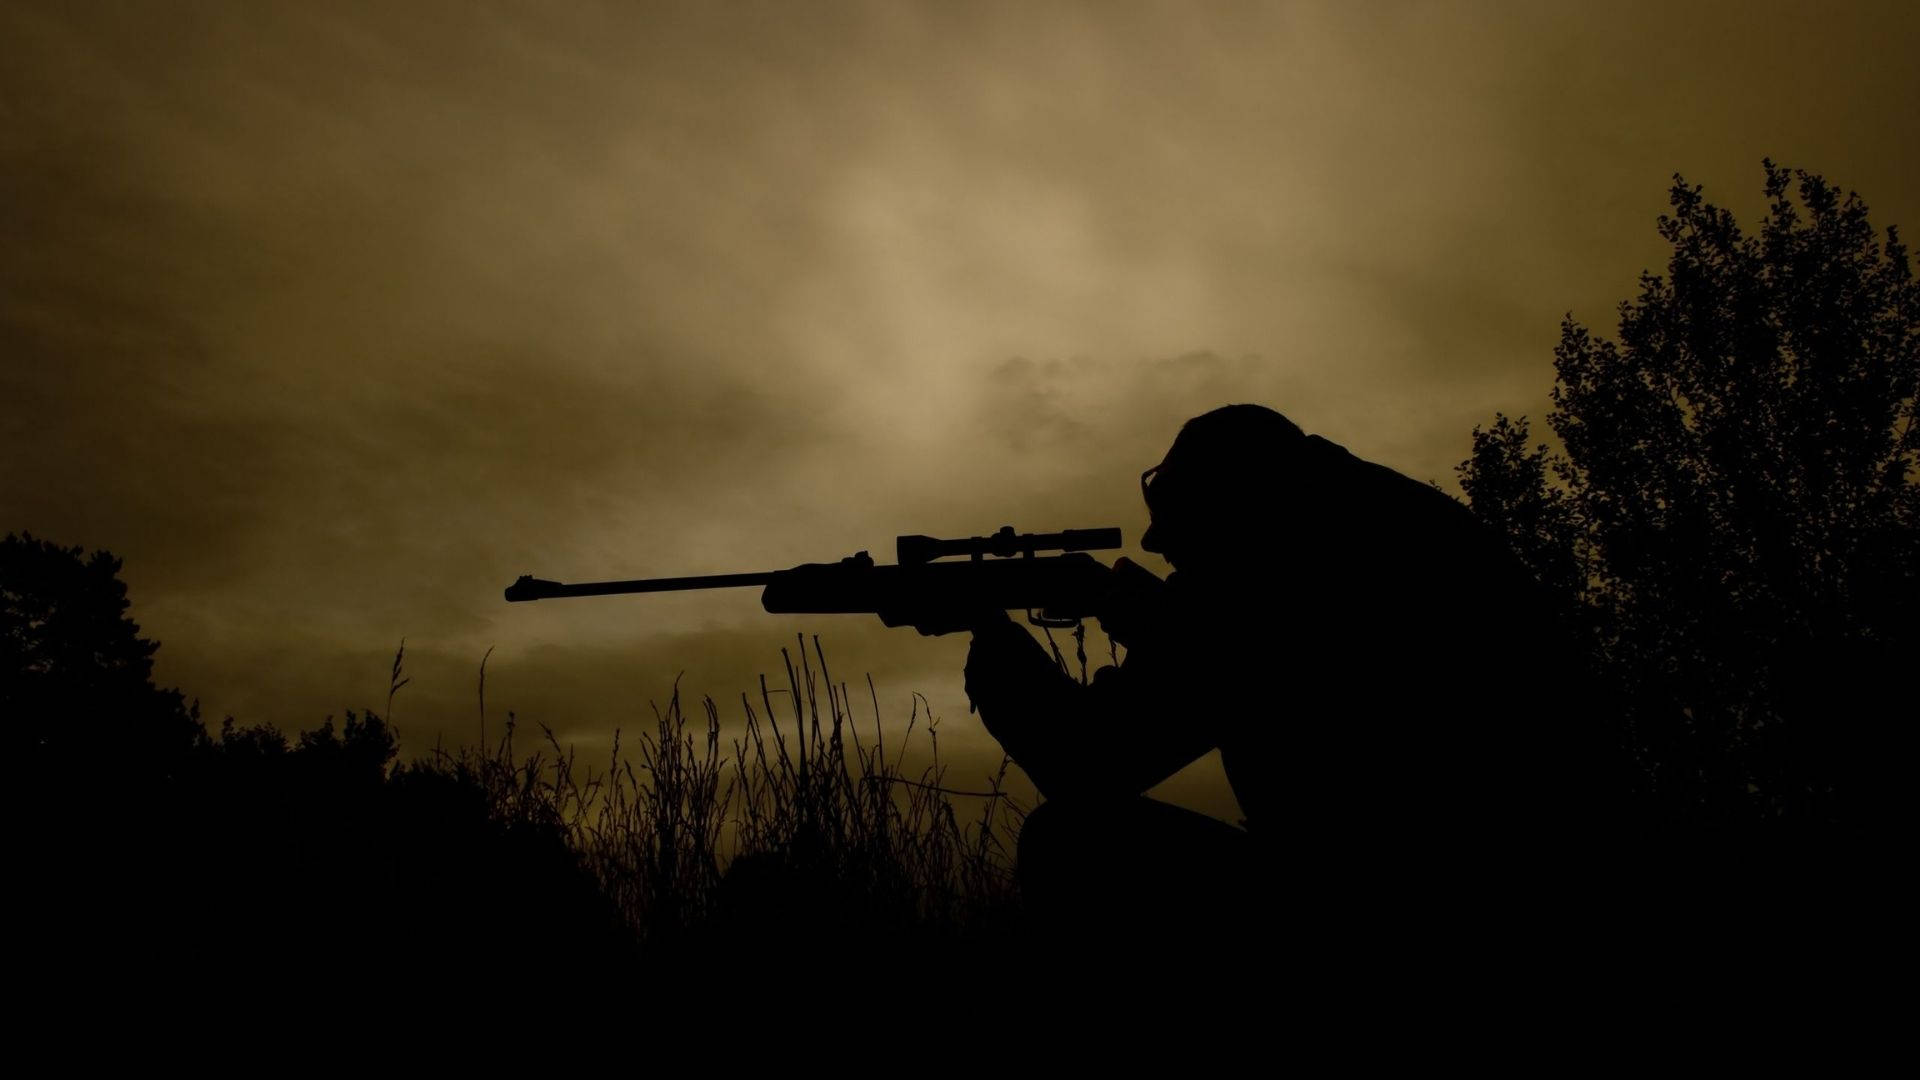 Sniper Soldier Silhouette Background